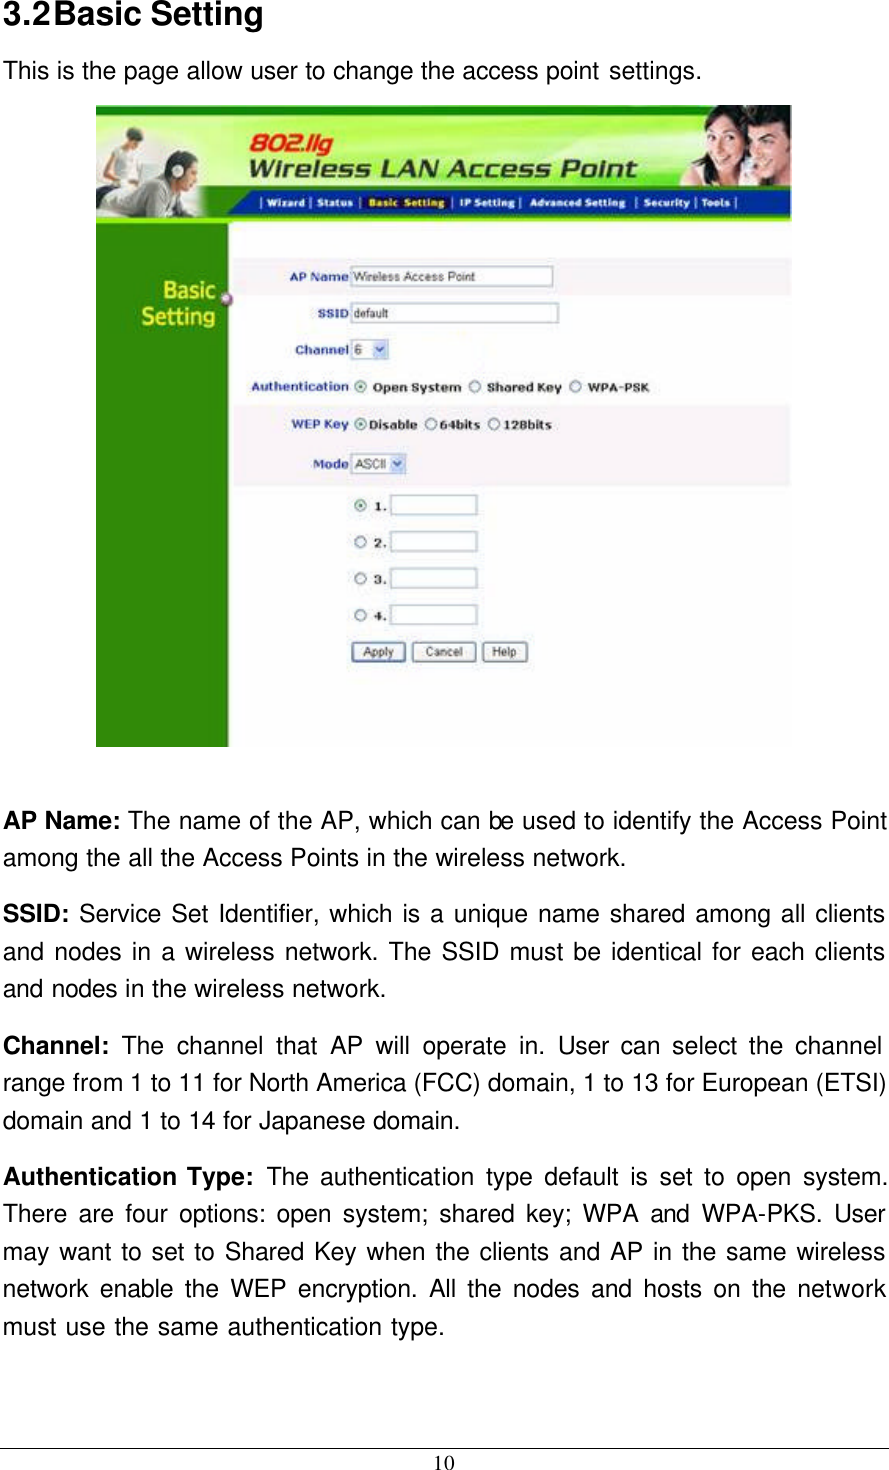  10 3.2 Basic Setting This is the page allow user to change the access point settings.   AP Name: The name of the AP, which can be used to identify the Access Point among the all the Access Points in the wireless network. SSID: Service Set Identifier, which is a unique name shared among all clients and nodes in a wireless network. The SSID must be identical for each clients and nodes in the wireless network. Channel:  The channel that AP will operate in. User can select the channel range from 1 to 11 for North America (FCC) domain, 1 to 13 for European (ETSI) domain and 1 to 14 for Japanese domain. Authentication Type: The authentication type default is set to open system.  There are four options: open system; shared key; WPA and WPA-PKS. User may want to set to Shared Key when the clients and AP in the same wireless network enable the WEP encryption. All the nodes and hosts on the network must use the same authentication type.    